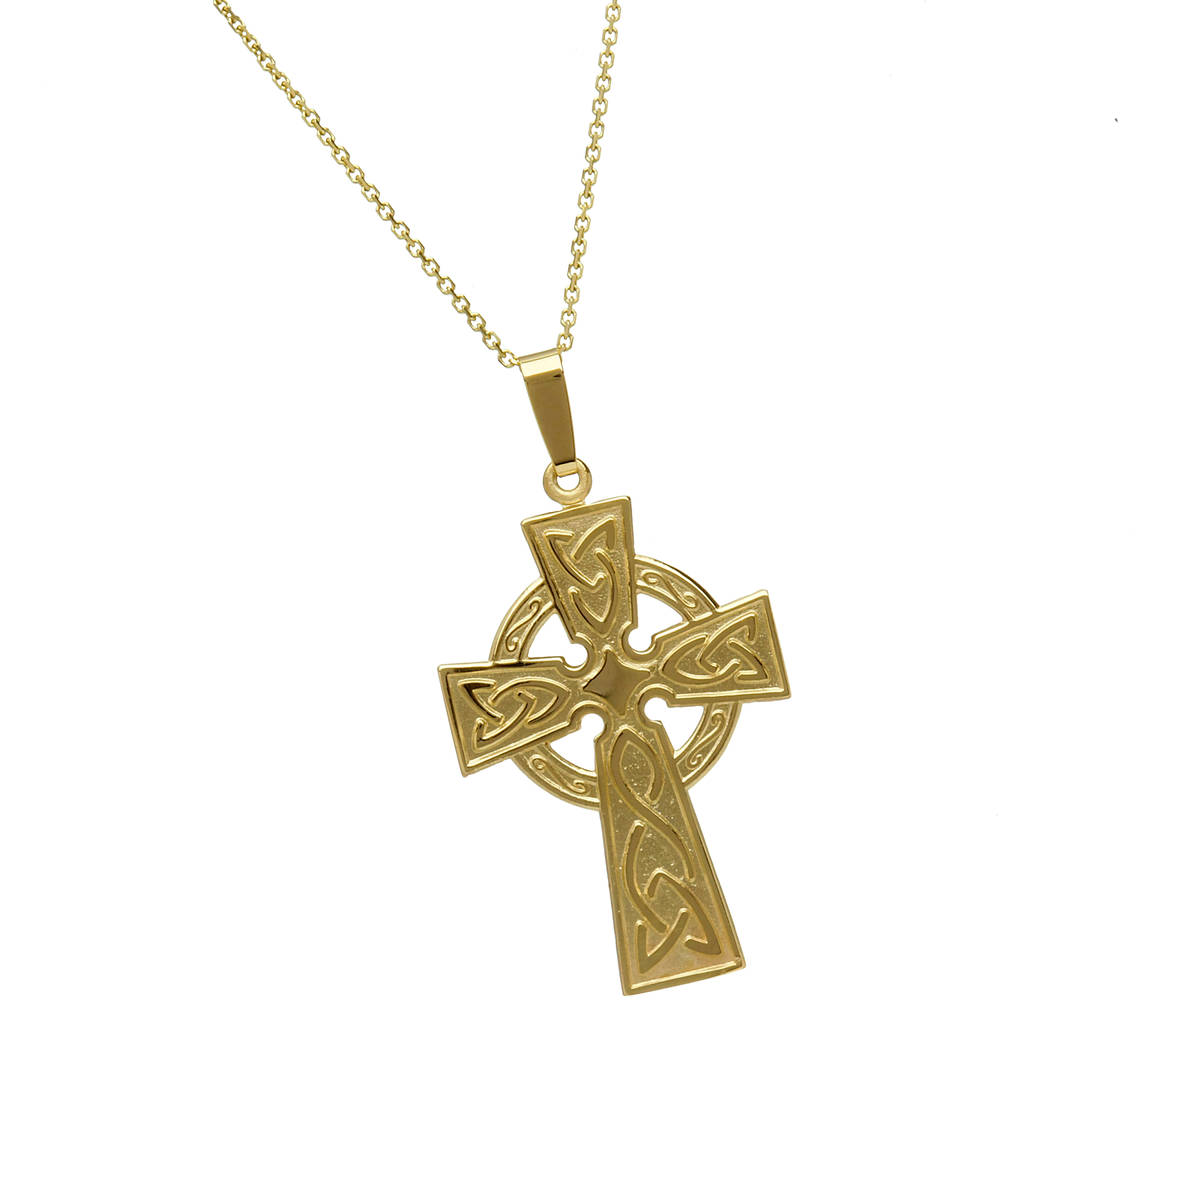 10 carat yellow gold large celtic cross with engraved back pendant.This is on a 20\" chain and if you prefer it in rose gold or white gold,just leave your preference in our comment box on checkout.